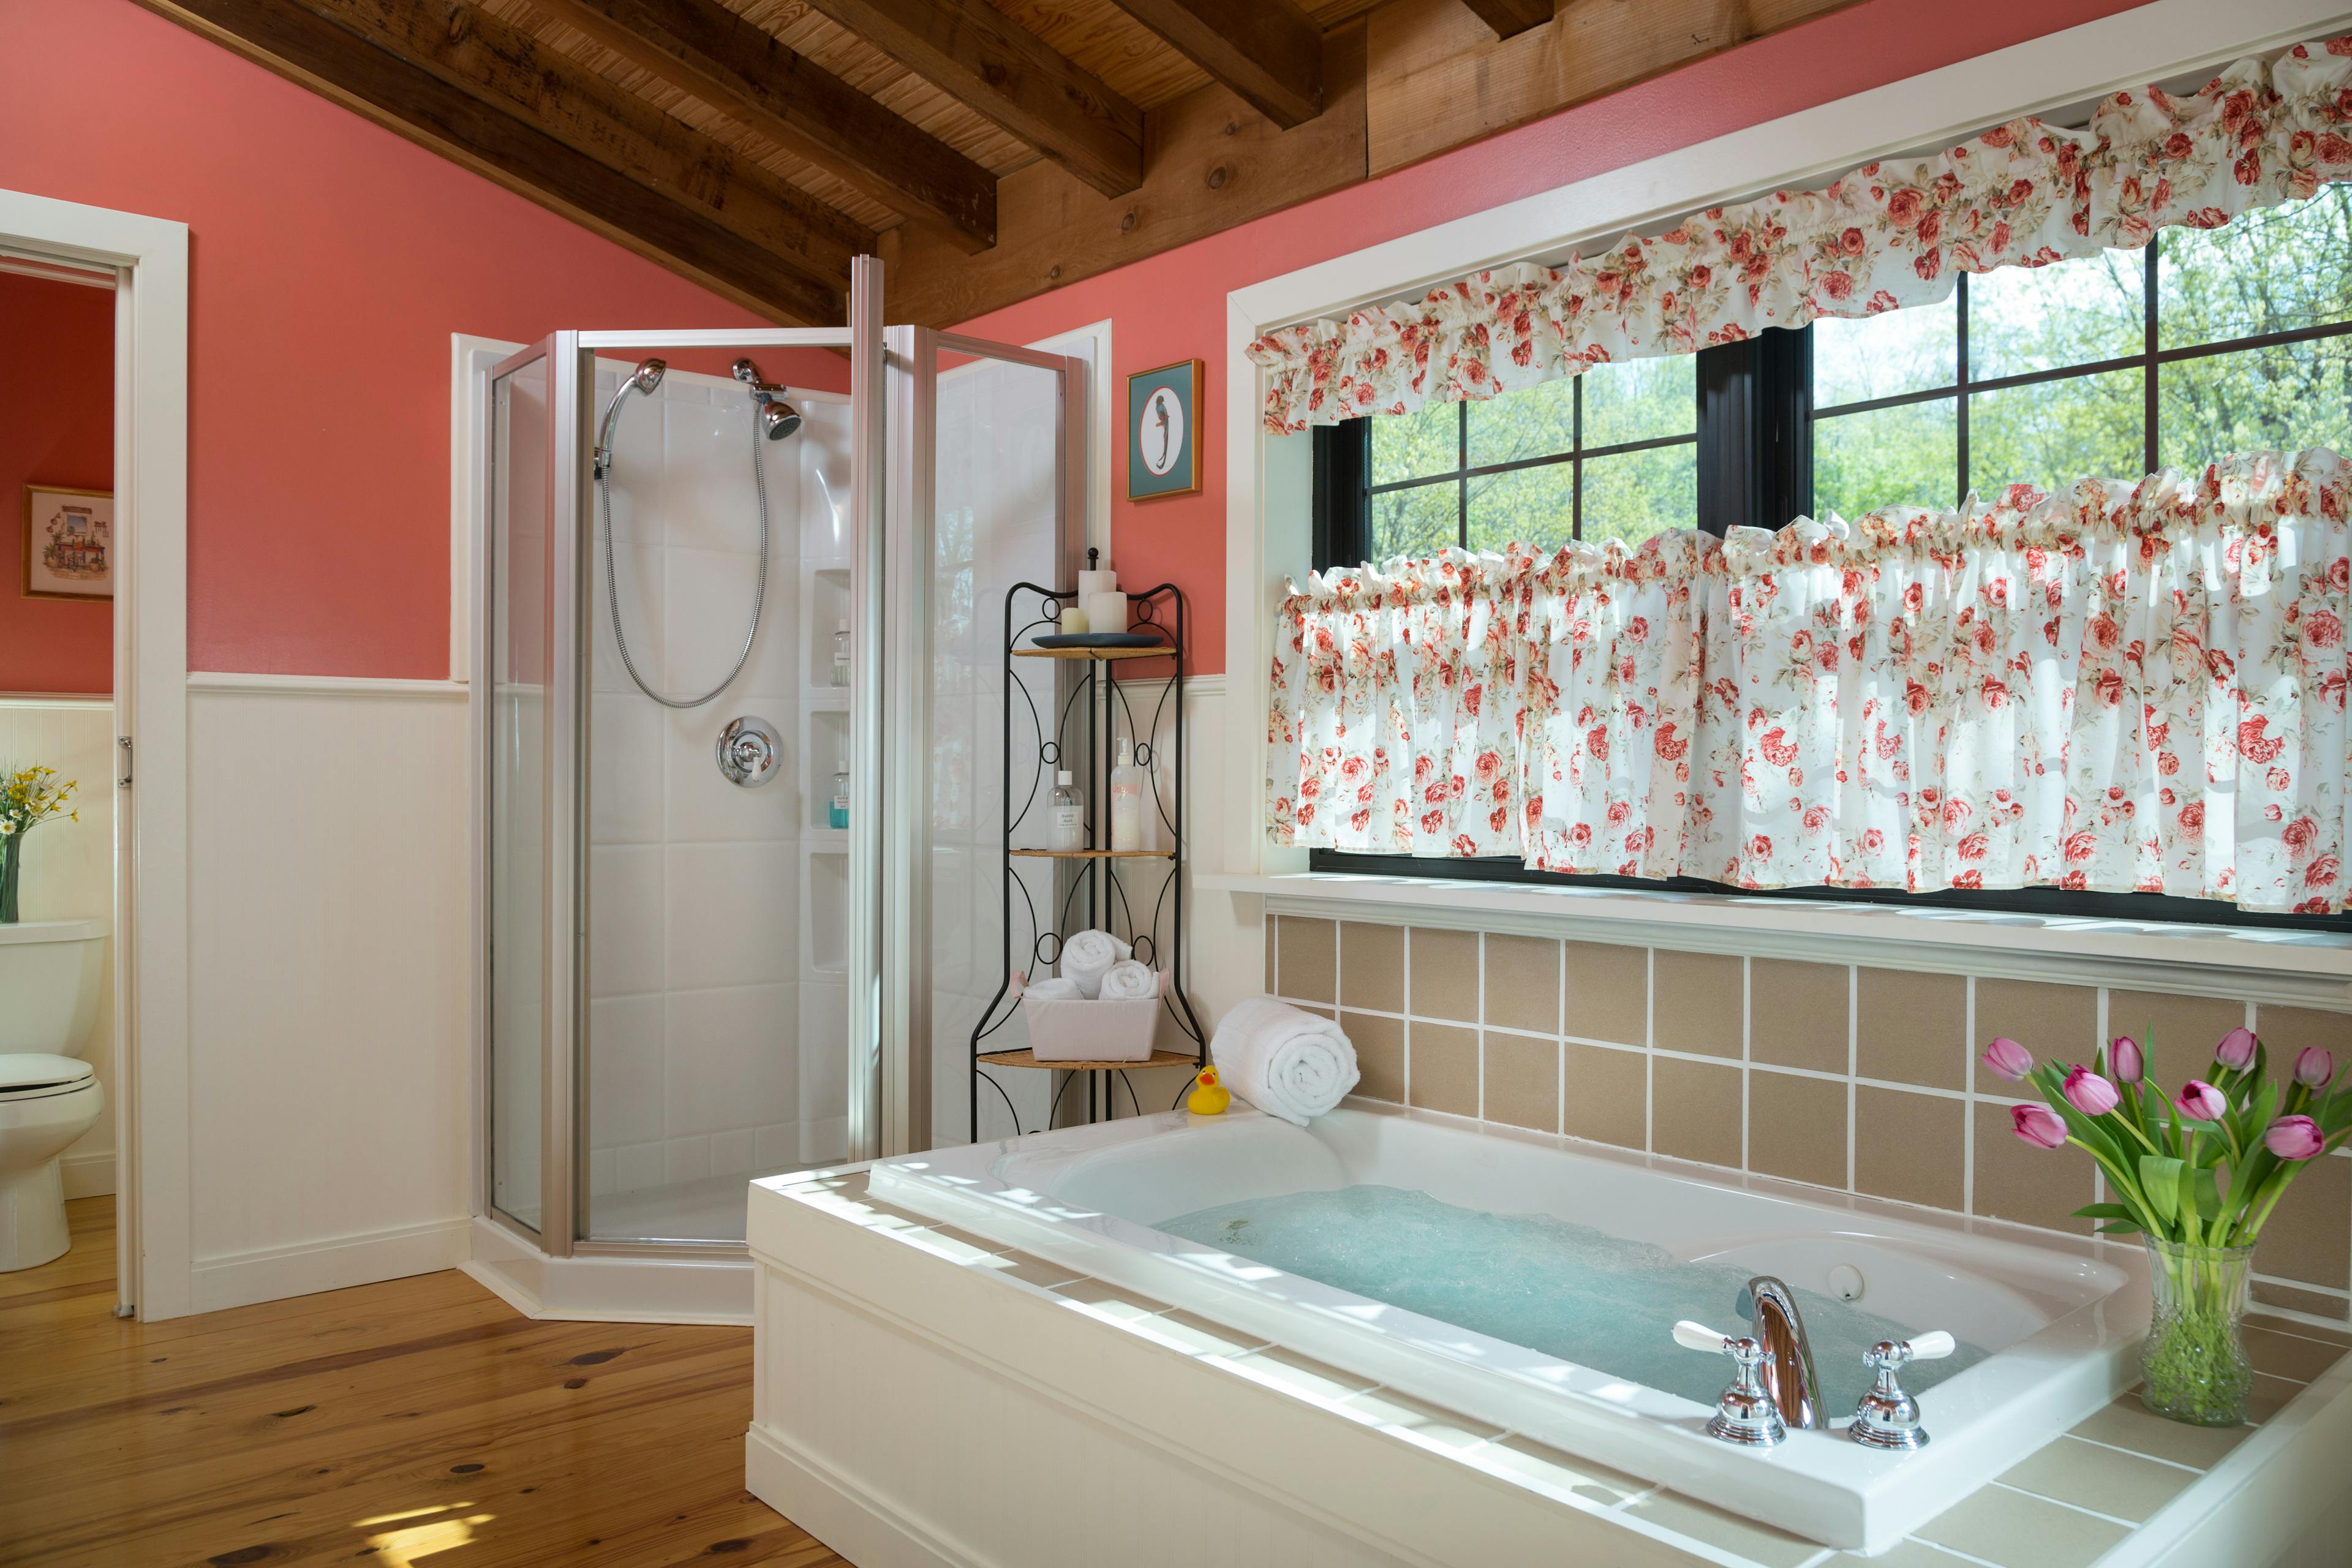 Large bathroom with a stand alone shower with a glass door.  Next to the shower is a small corner shelf with bath accessories.  To the right of the shelf is a jetted tub filled with water, and windows with pink & white curtains.